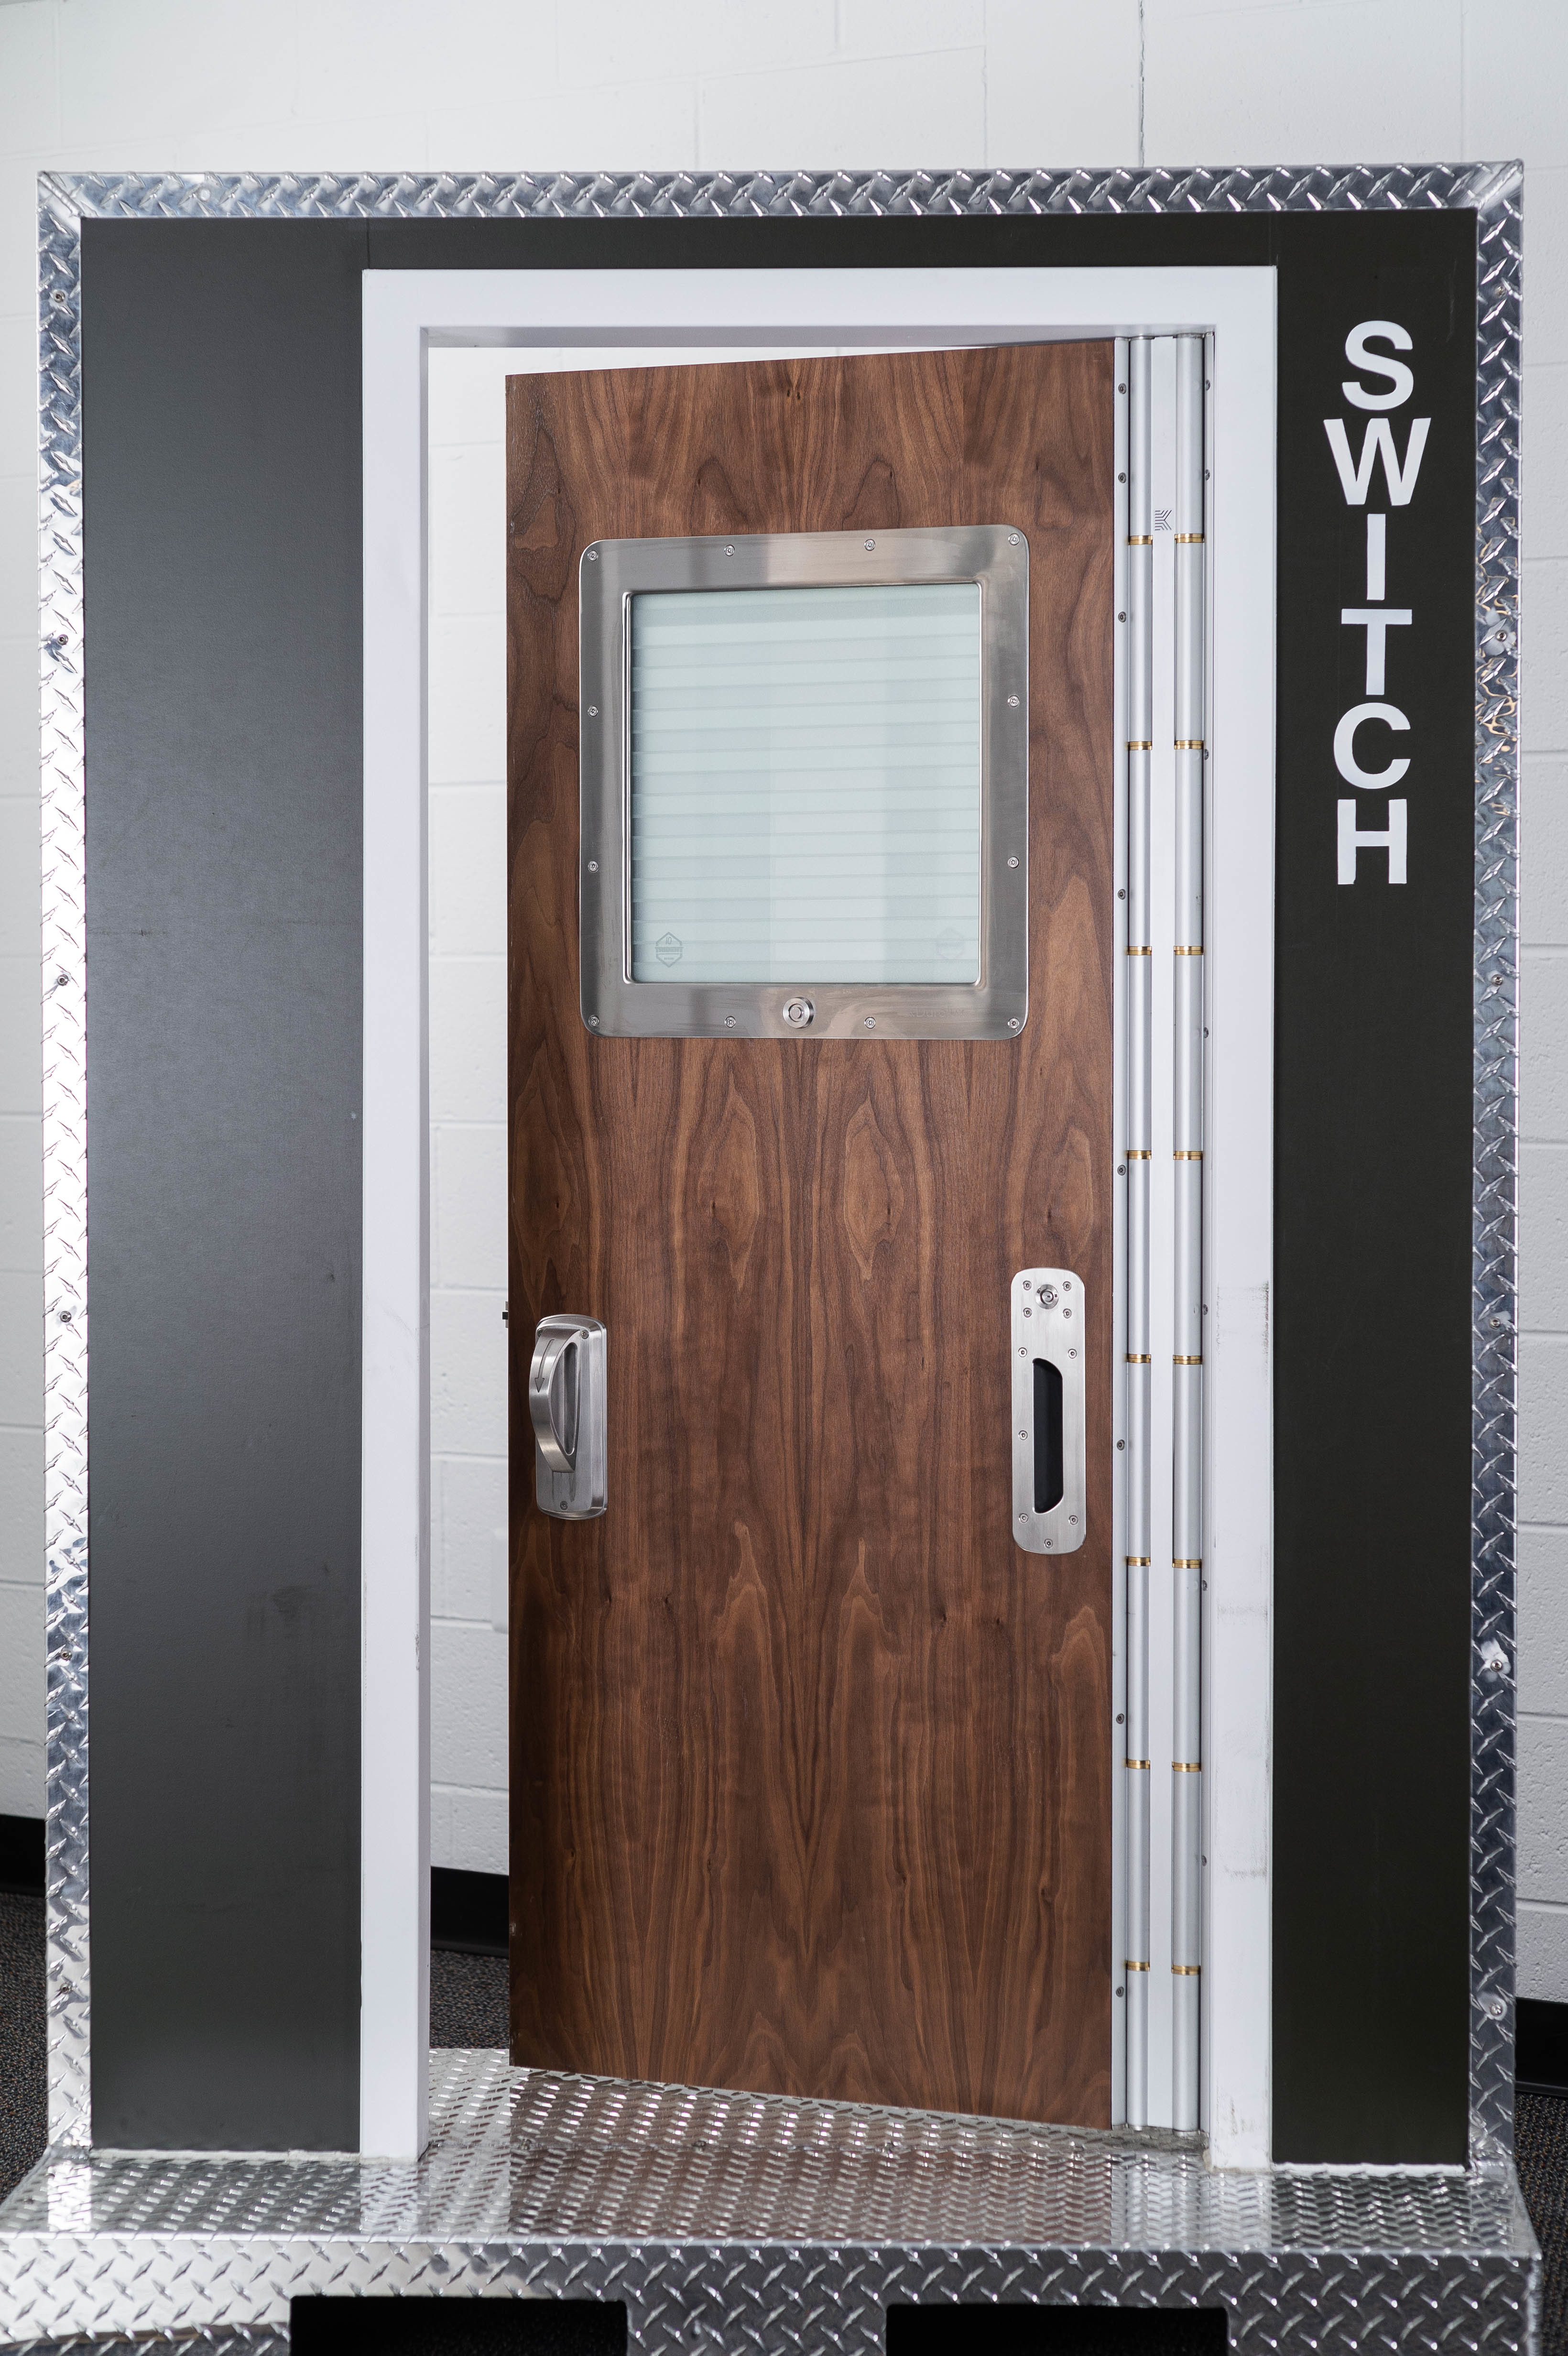 SWITCH Anti-Barricade Door System by Kingsway Group USA.